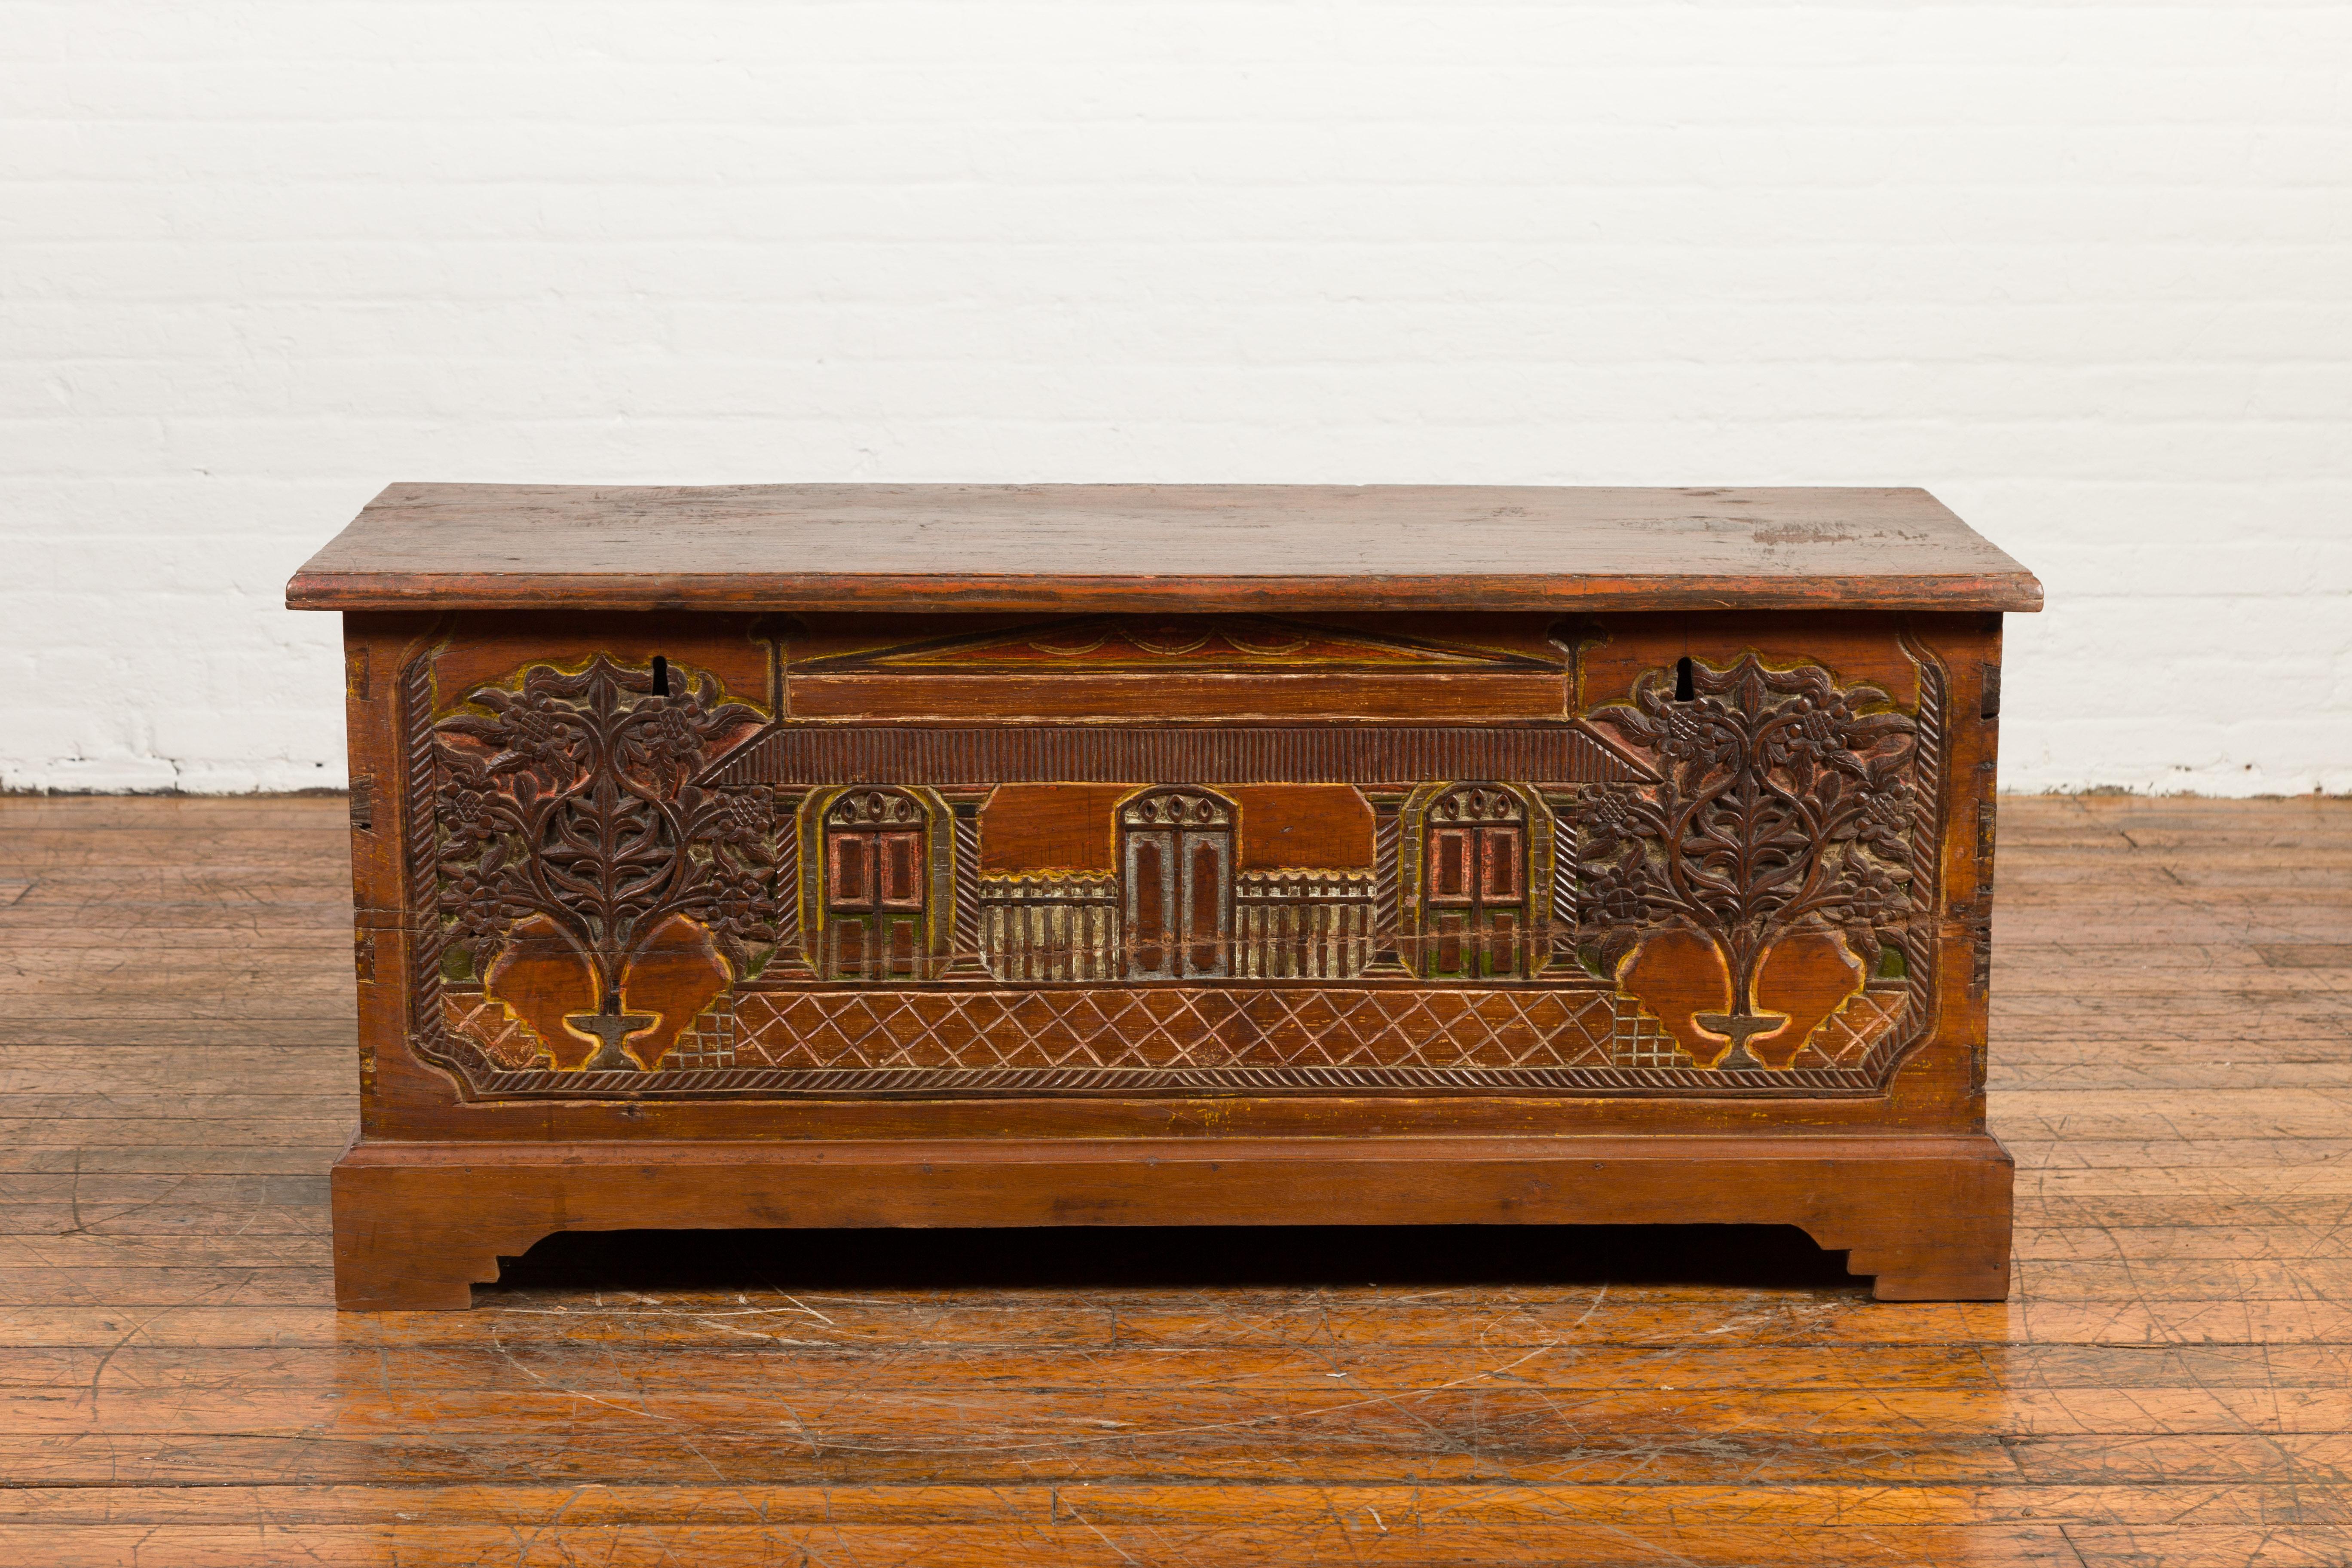 An Indonesian carved and painted trunk from the 19th century, with architecture and foliage. Created in Indonesia during the 19th century, this trunk, ideal to be used as a blanket chest, features a rectangular lid that opens up to reveal a